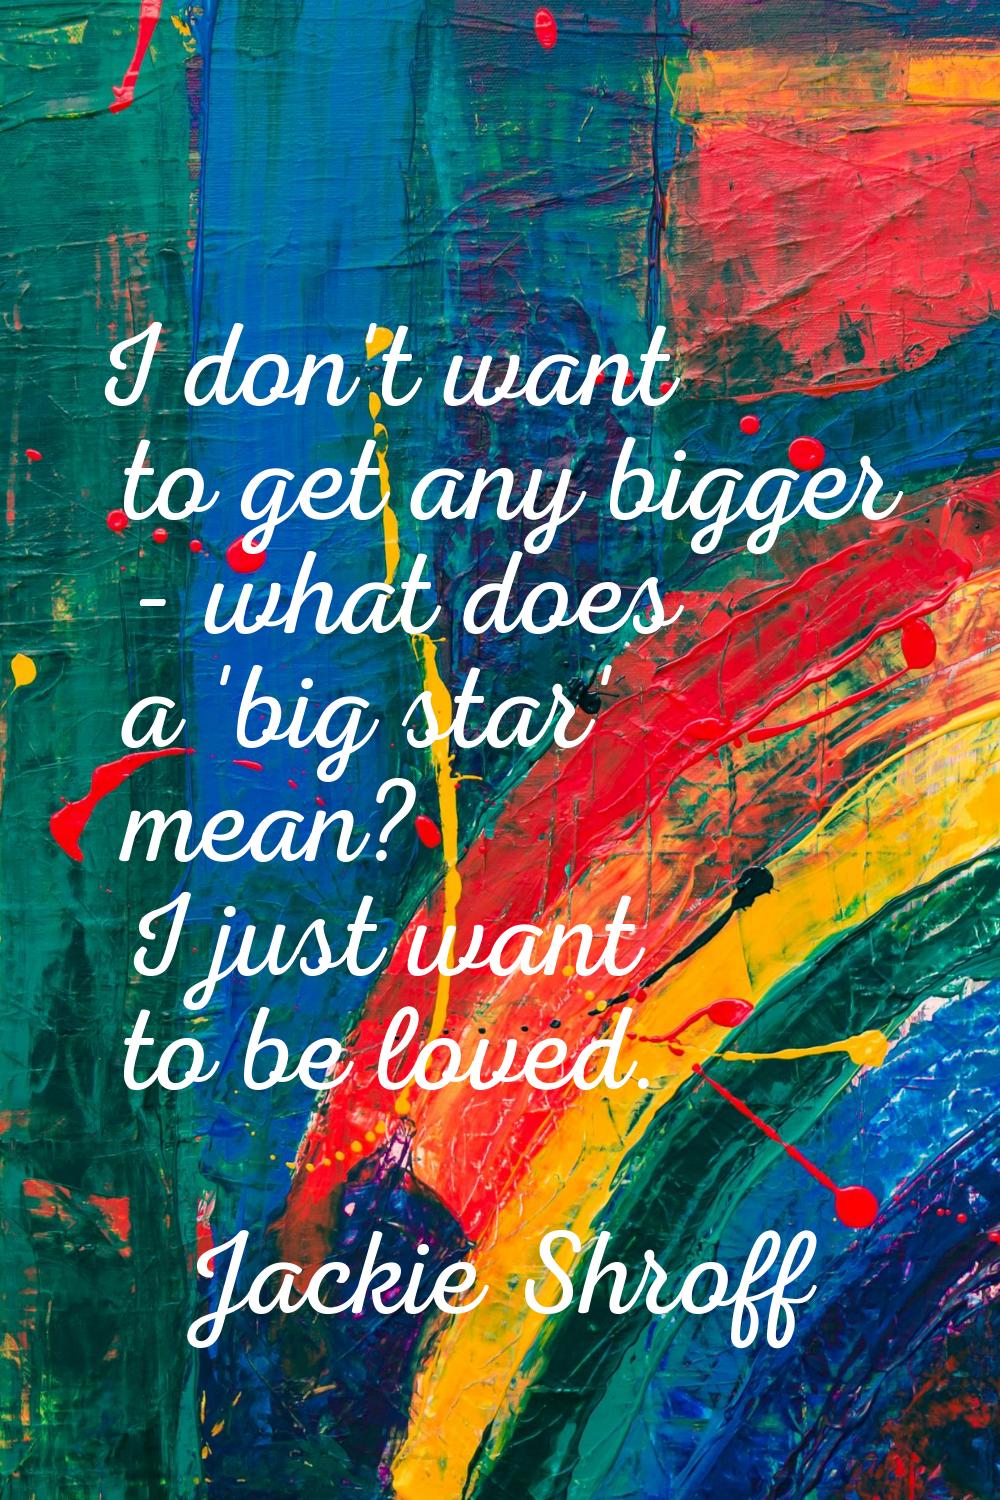 I don't want to get any bigger - what does a 'big star' mean? I just want to be loved.